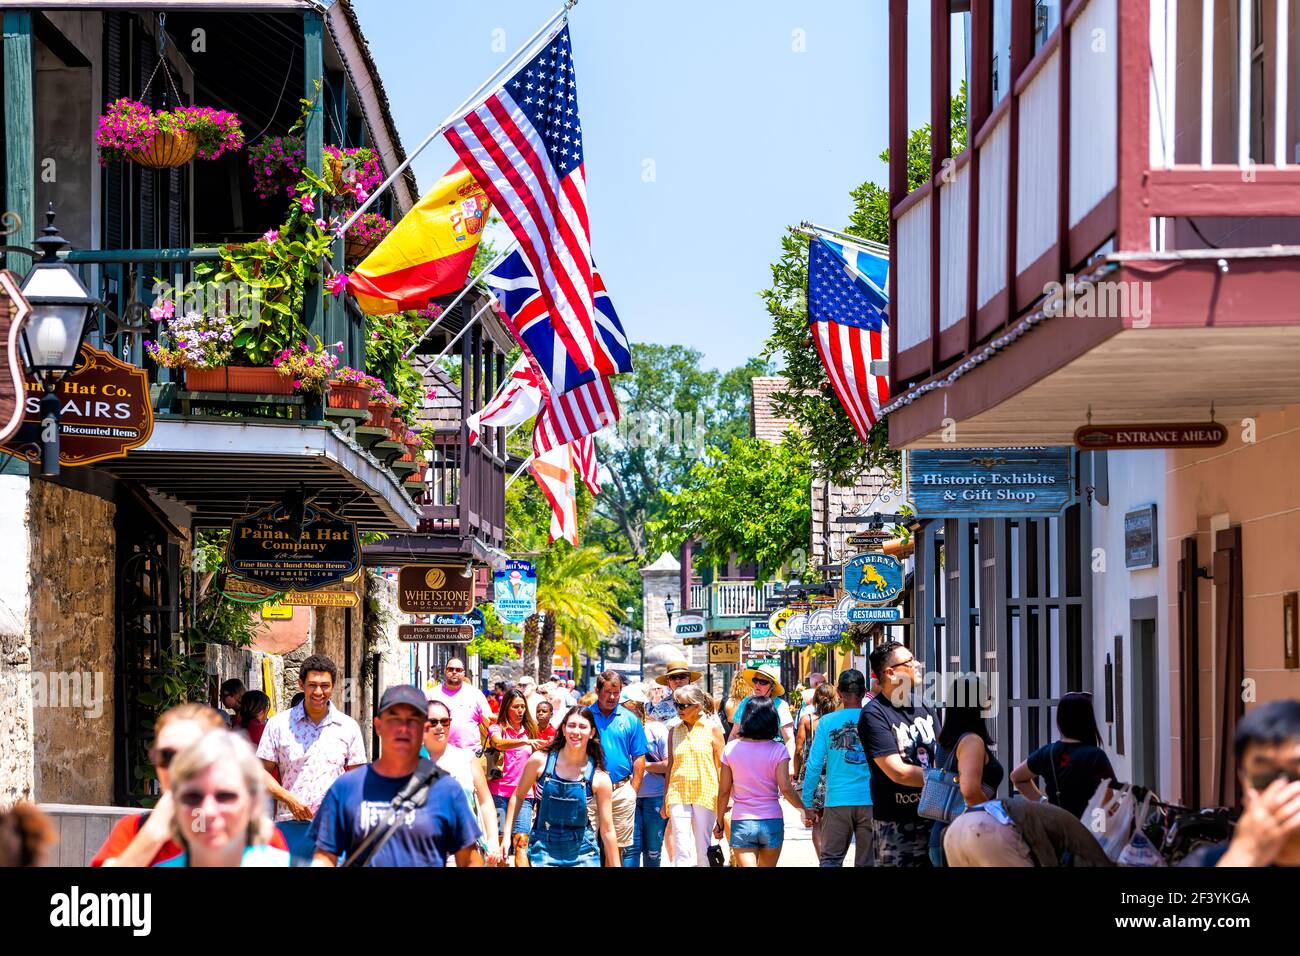 St. Augustine, USA - May 10, 2018: People shopping at Florida city St George Street by stores shops and restaurants in old town city with American and Stock Photo